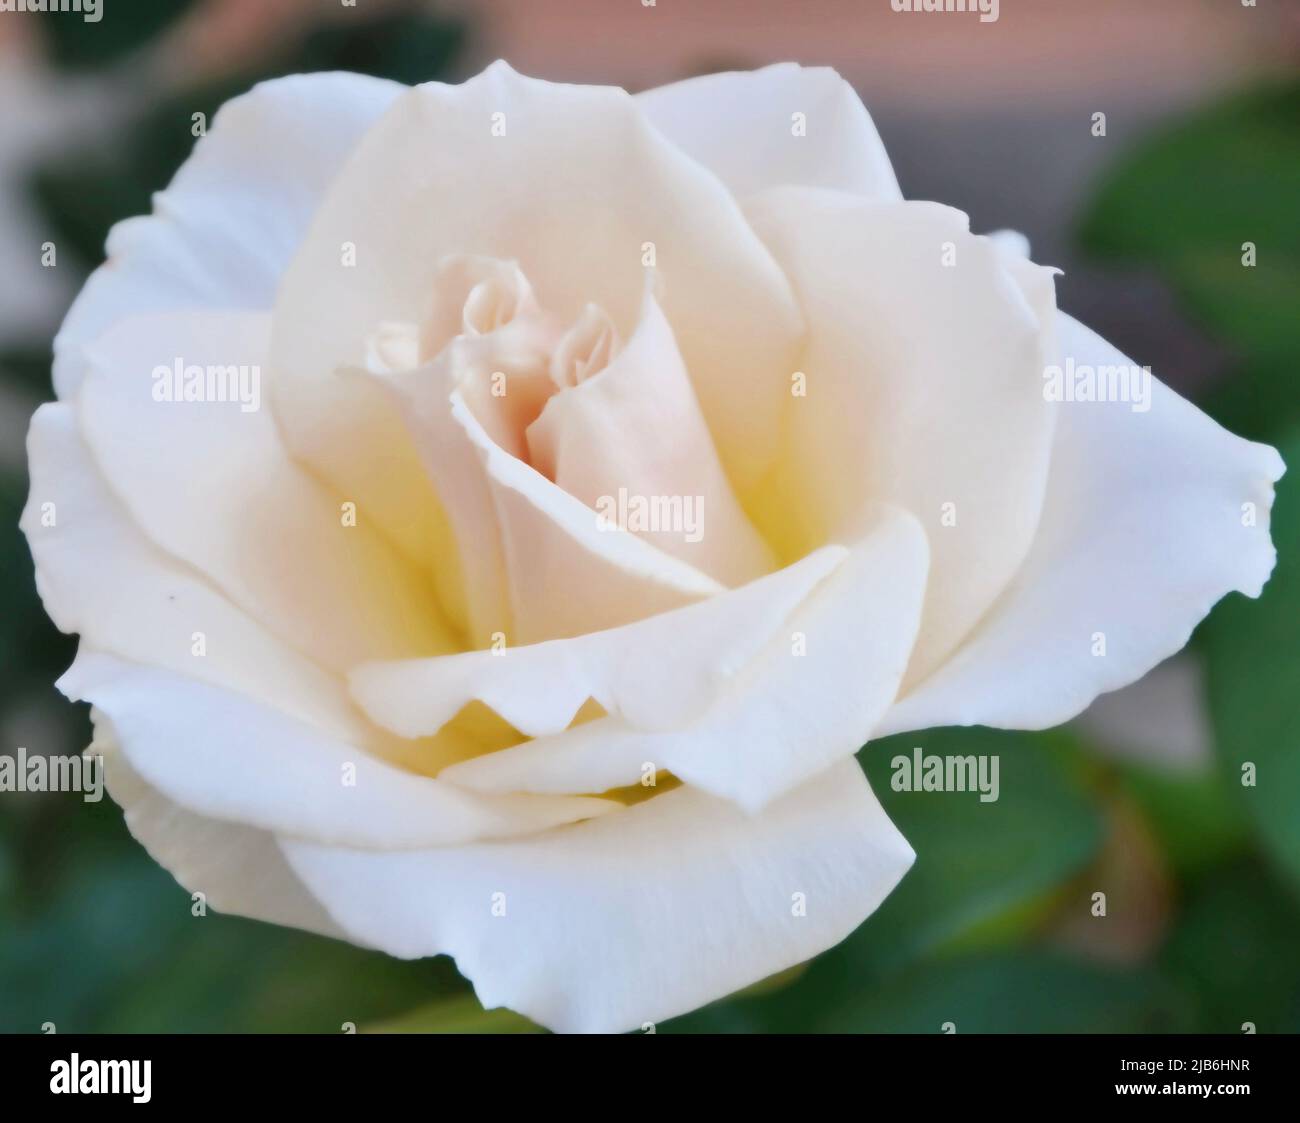 Wet white Rose. A white rose that is still wet with rain drops. Wet white rose background. Close-up picture of a single flowers with dew drops on. Stock Photo